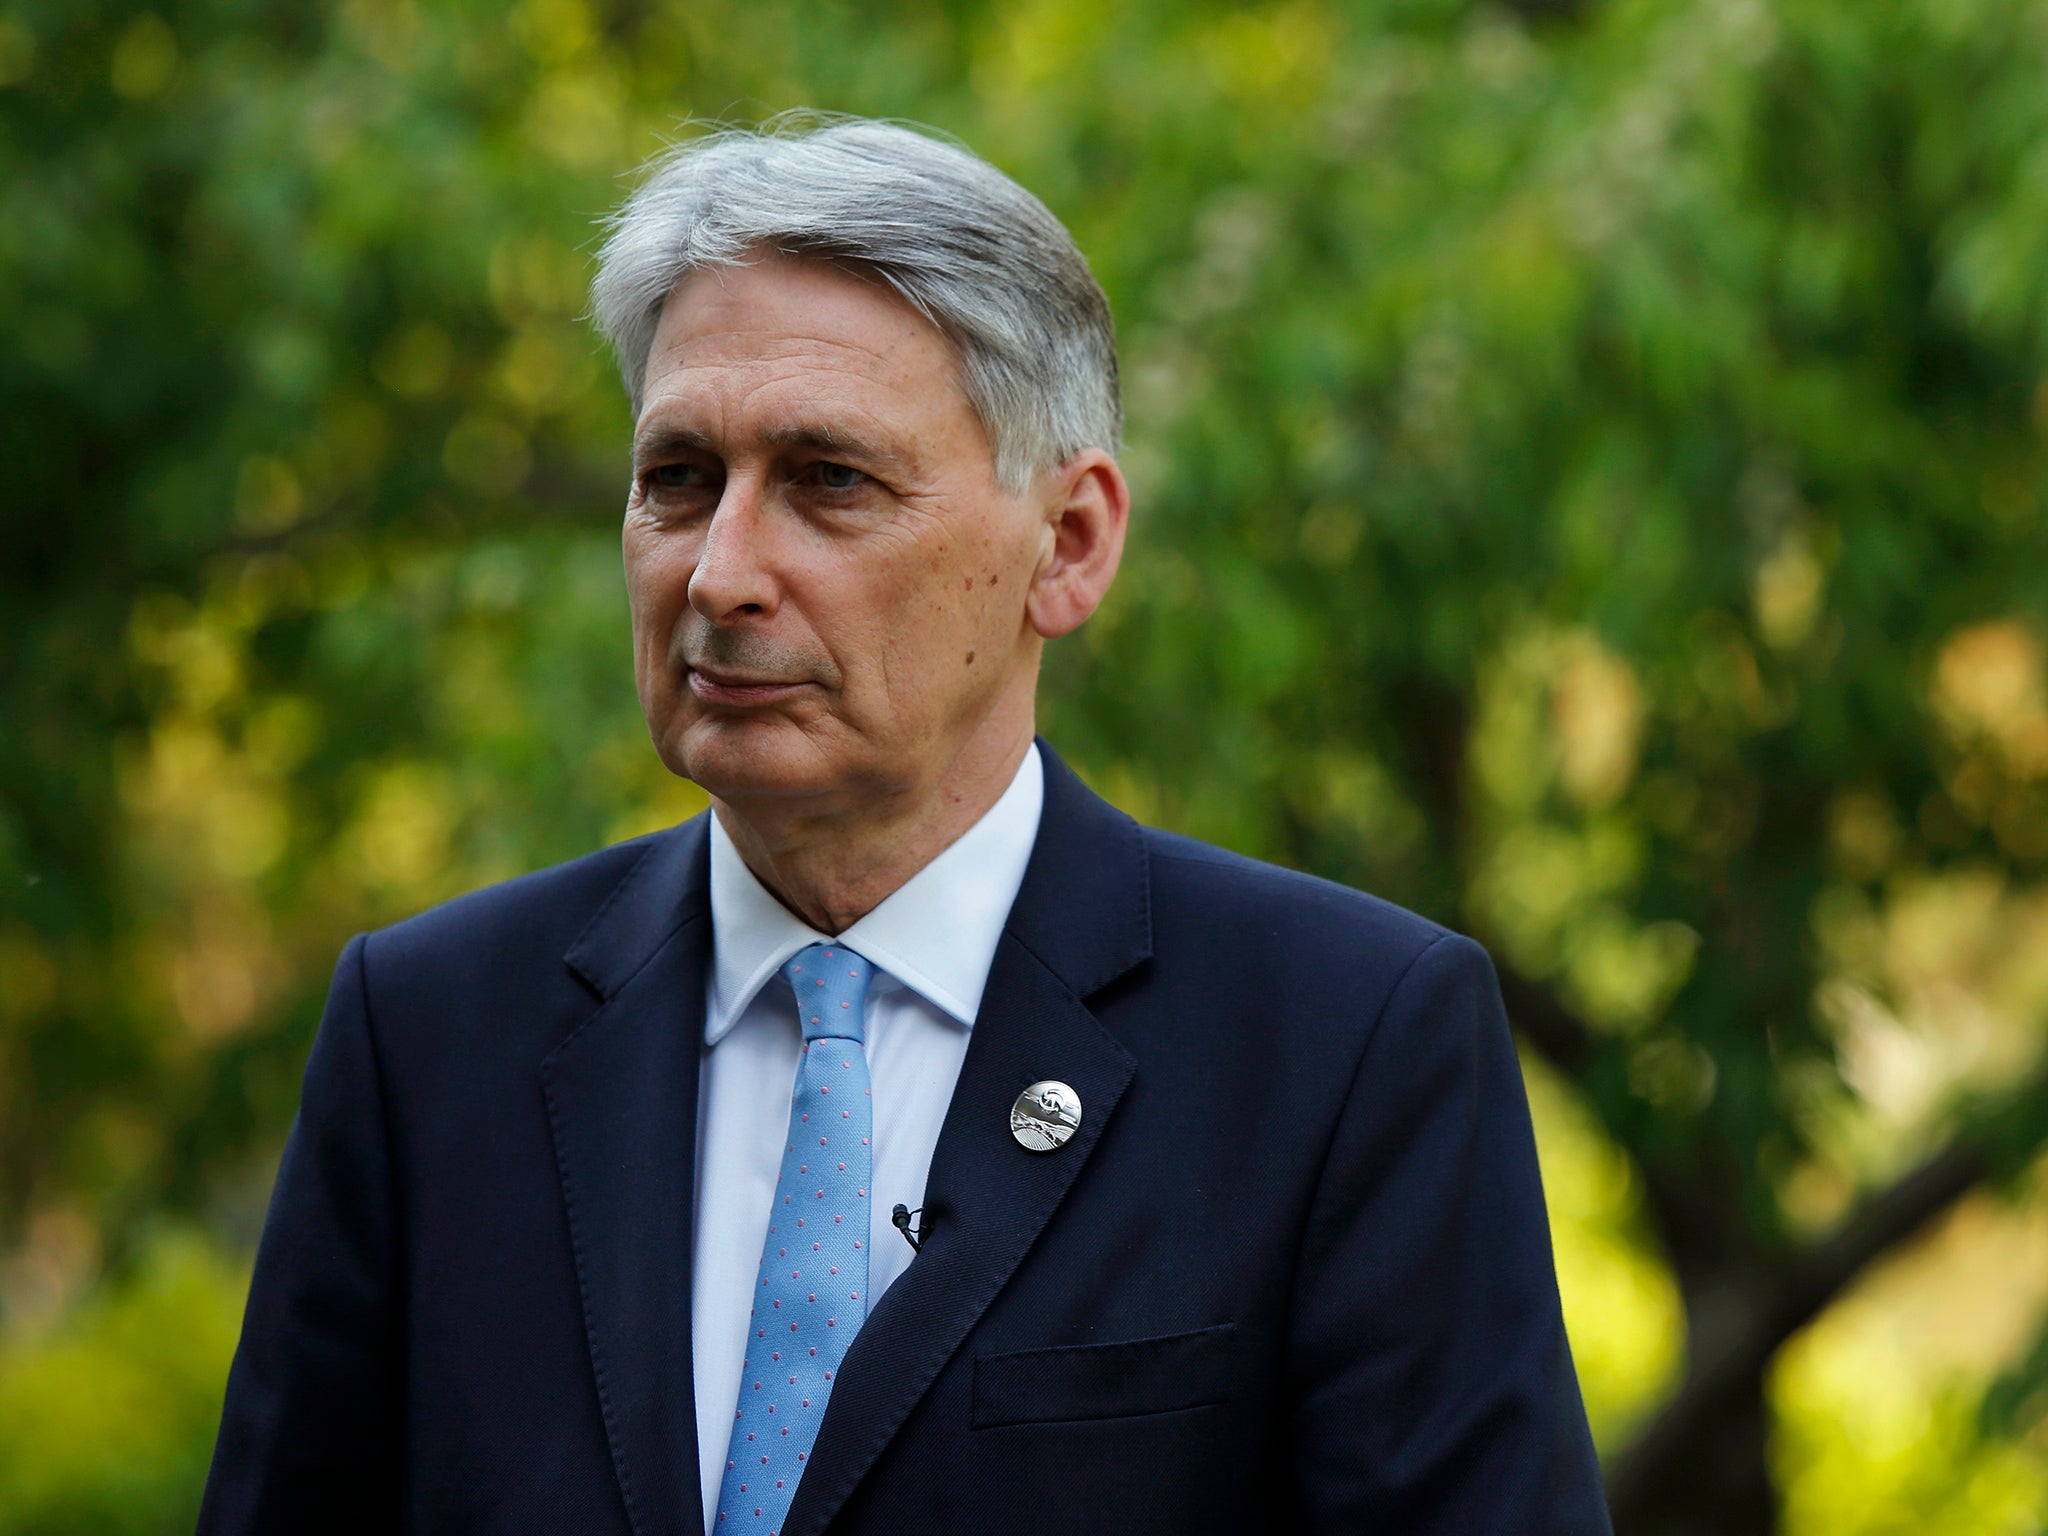 Philip Hammond, chancellor in Theresa May’s government, fought in vain for a Brexit that would keep the UK in the EU single market